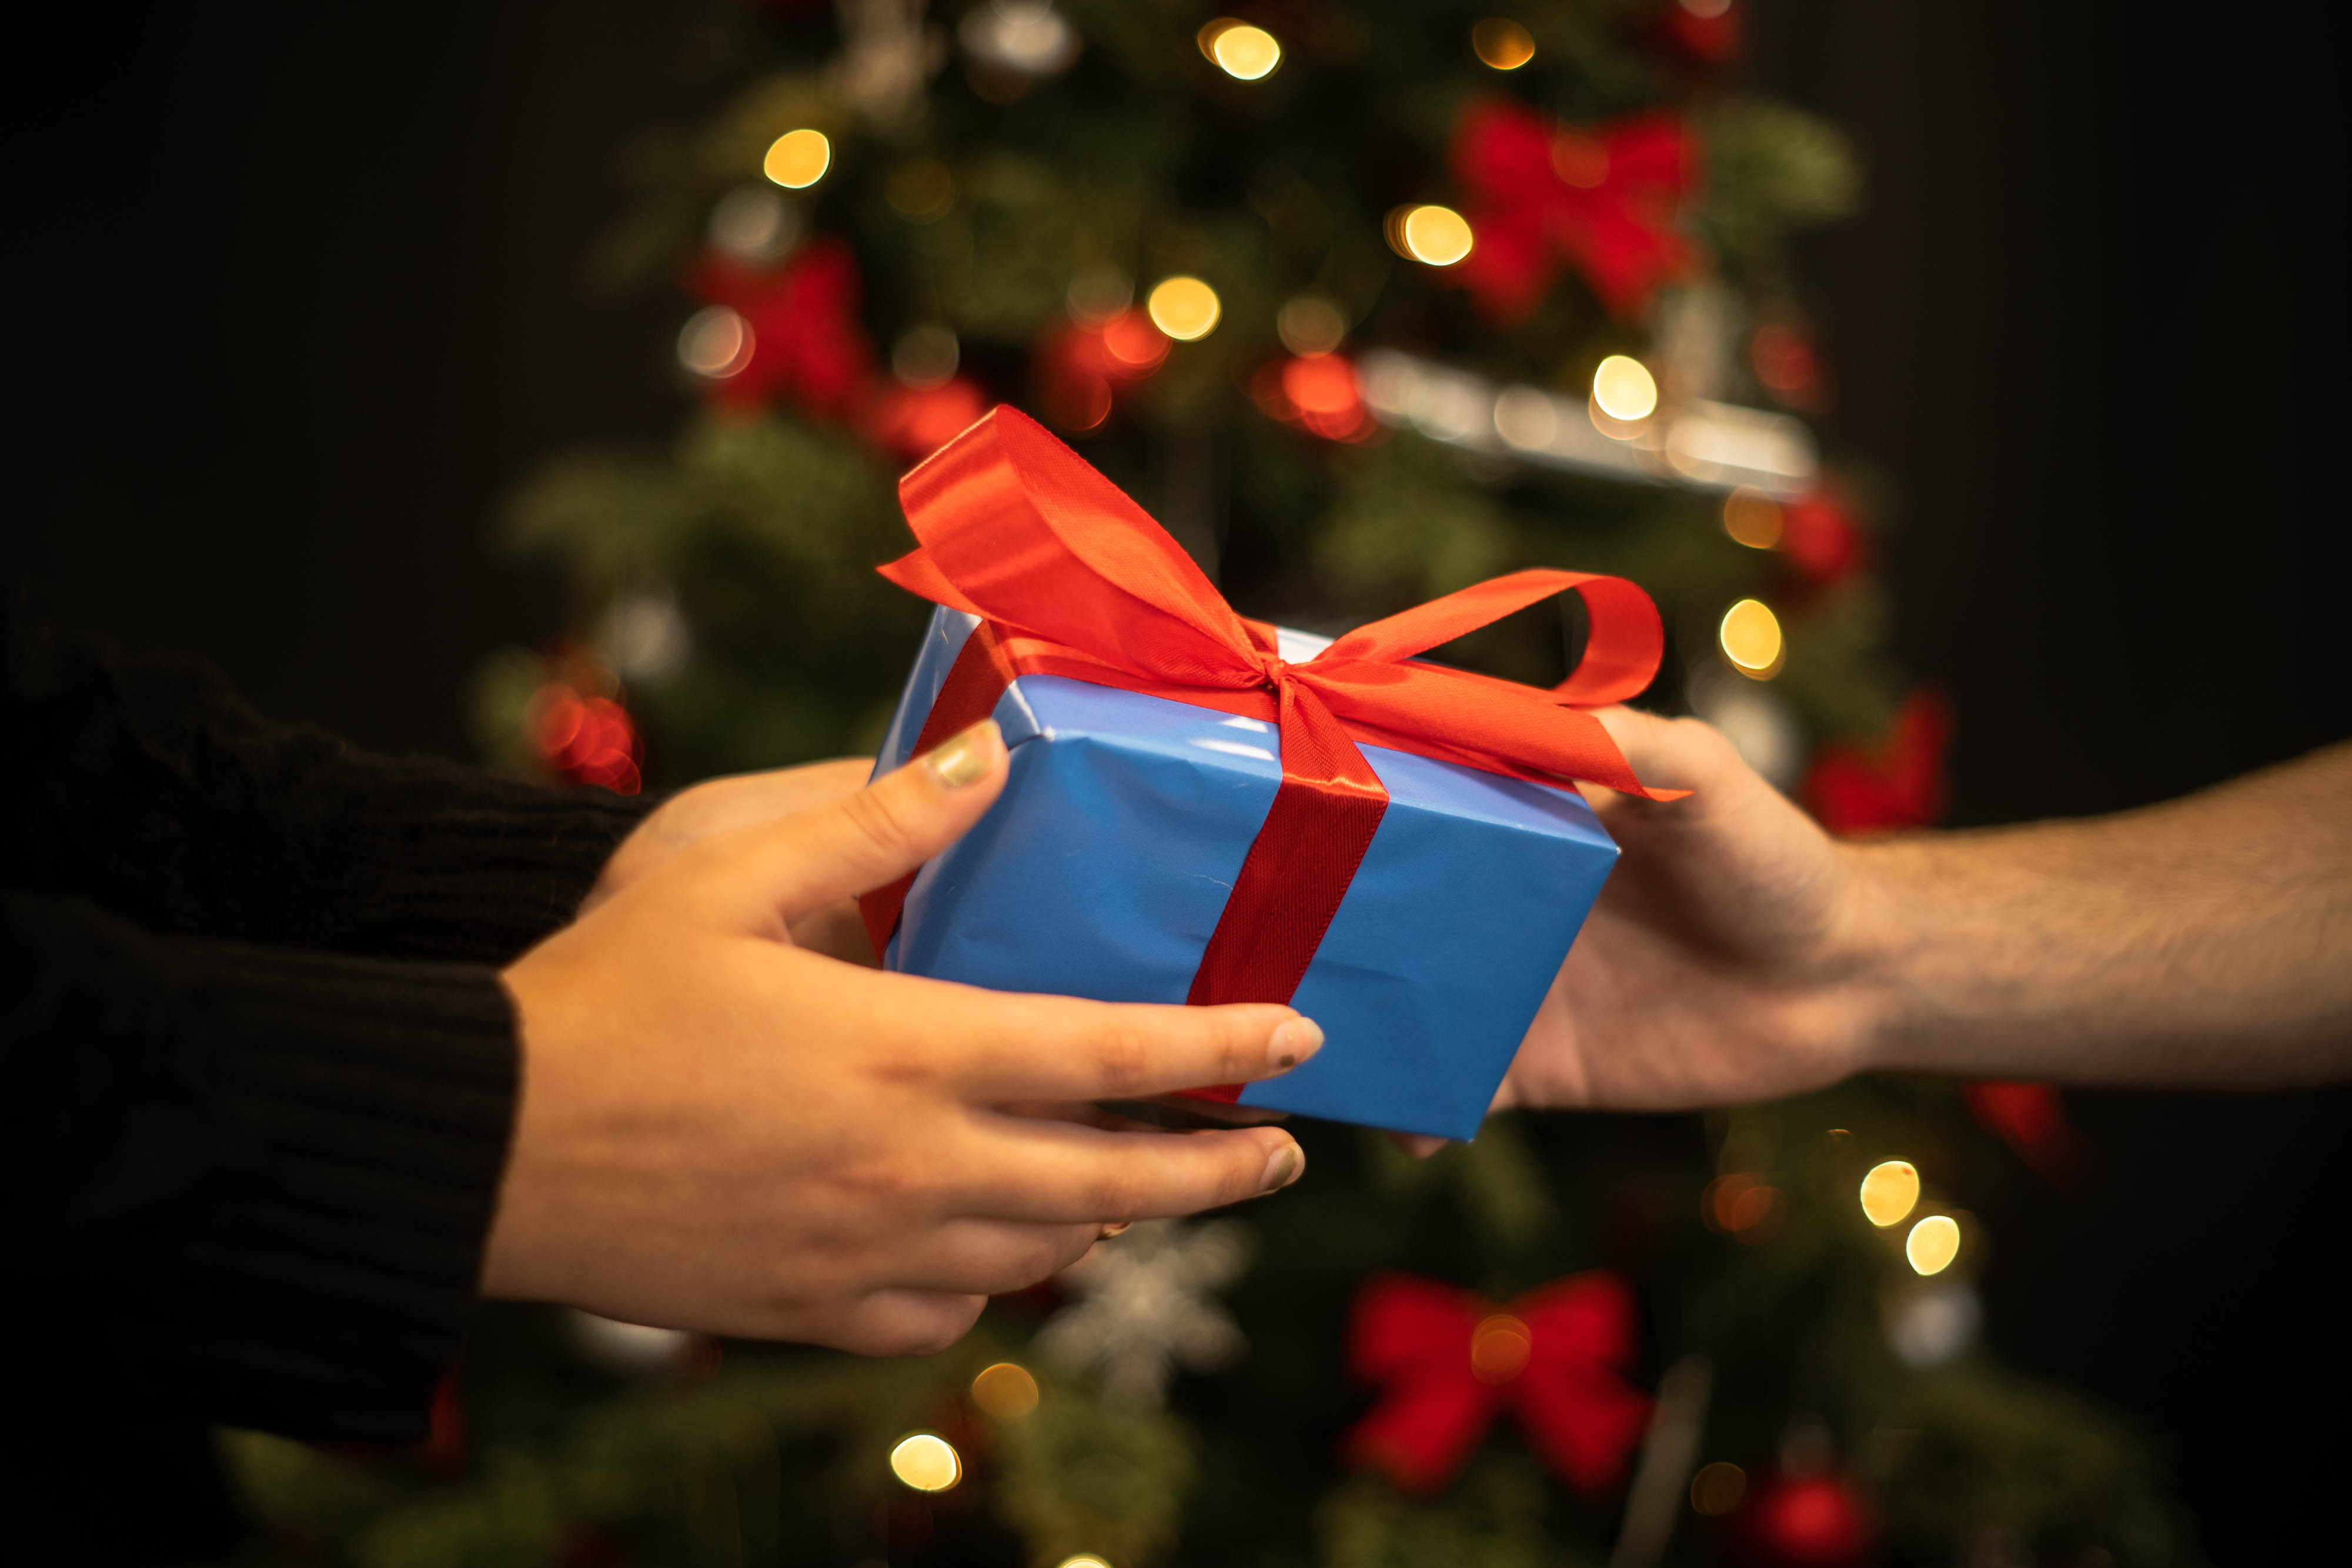 How To Manage A Successful Gift Exchange | Steps, Tips, Ideas & More